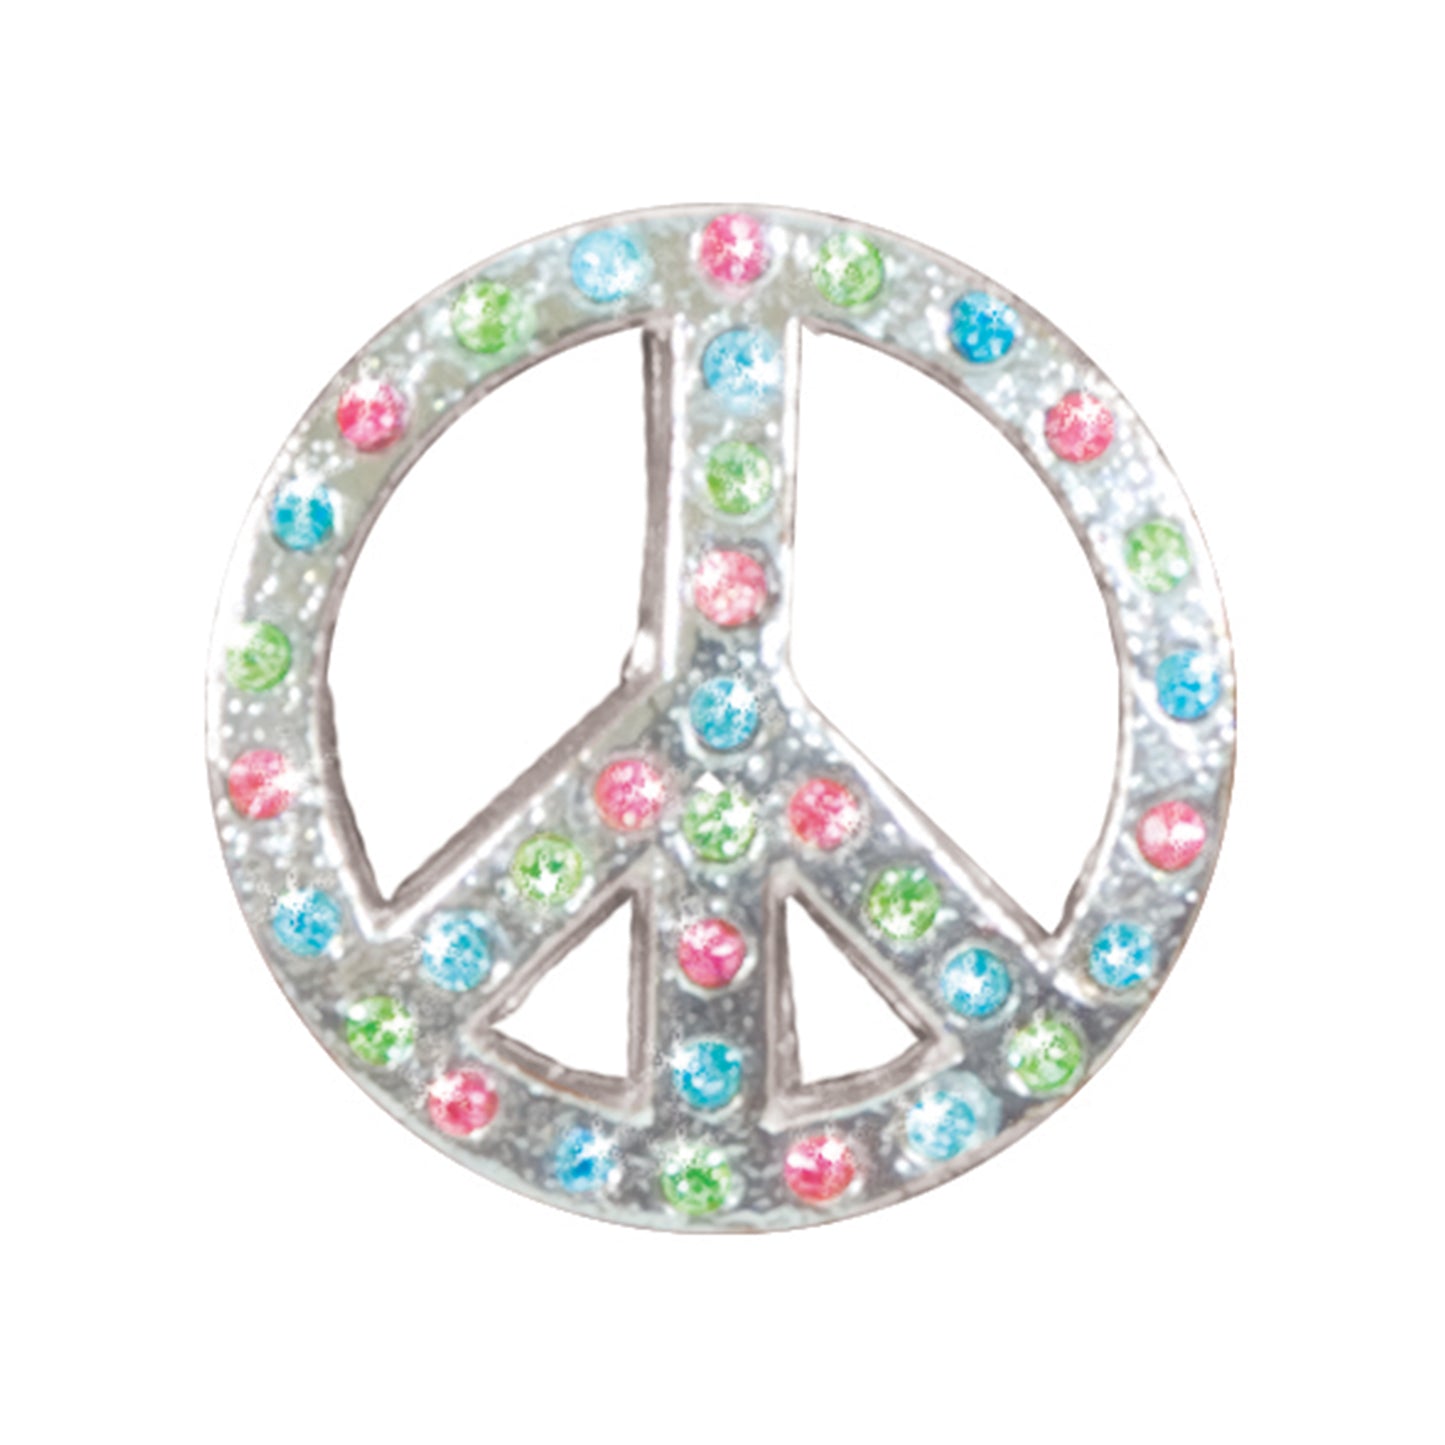 1-1/4" B3 Peace design silver concho with multicolored crystals (set of 4). 